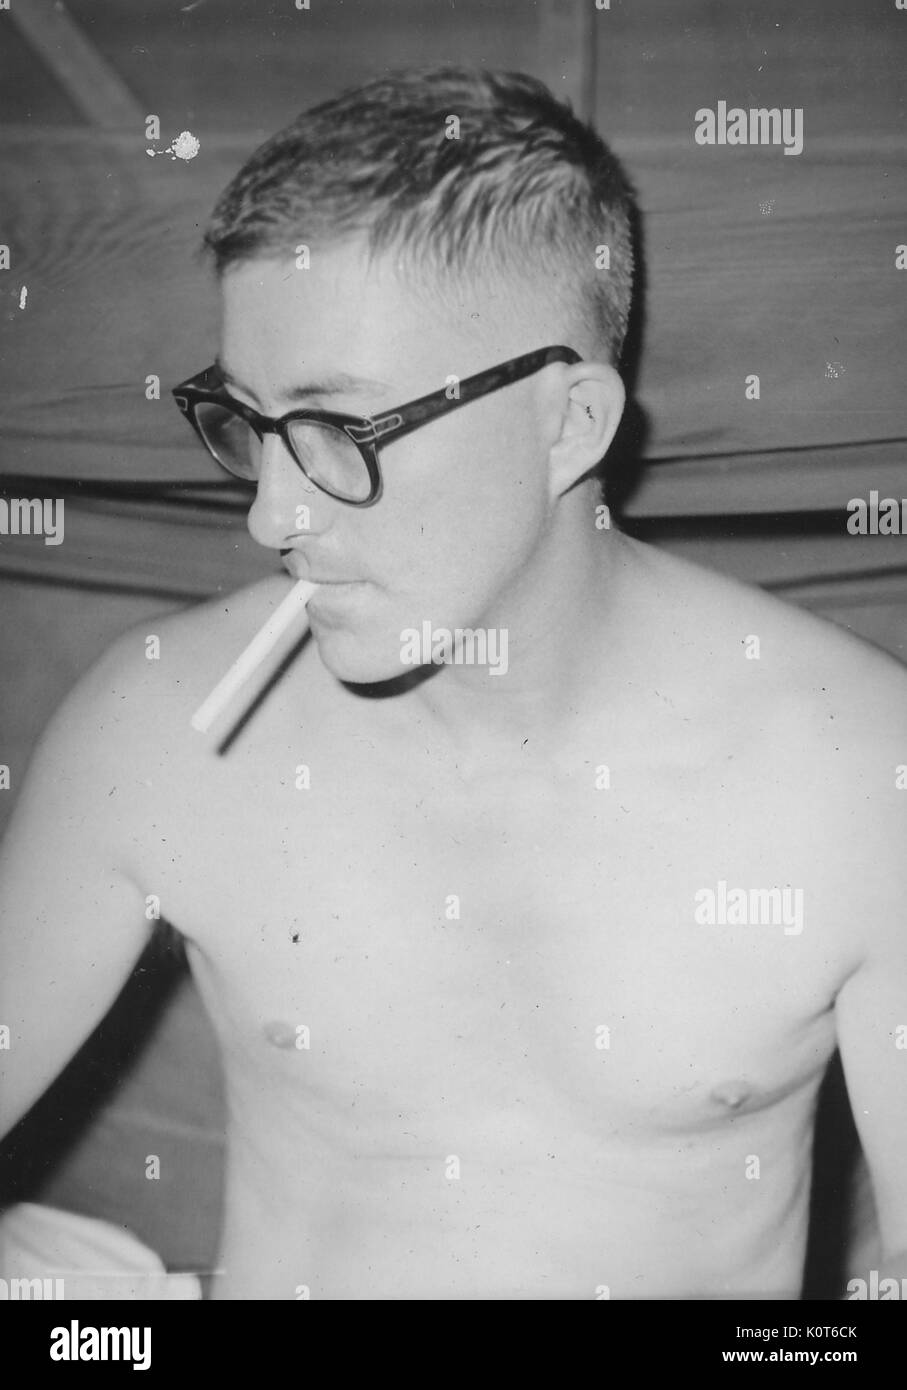 Soldier smoking a cigarette without his shirt on, wearing military issue  glasses, Vietnam, 1967 Stock Photo - Alamy